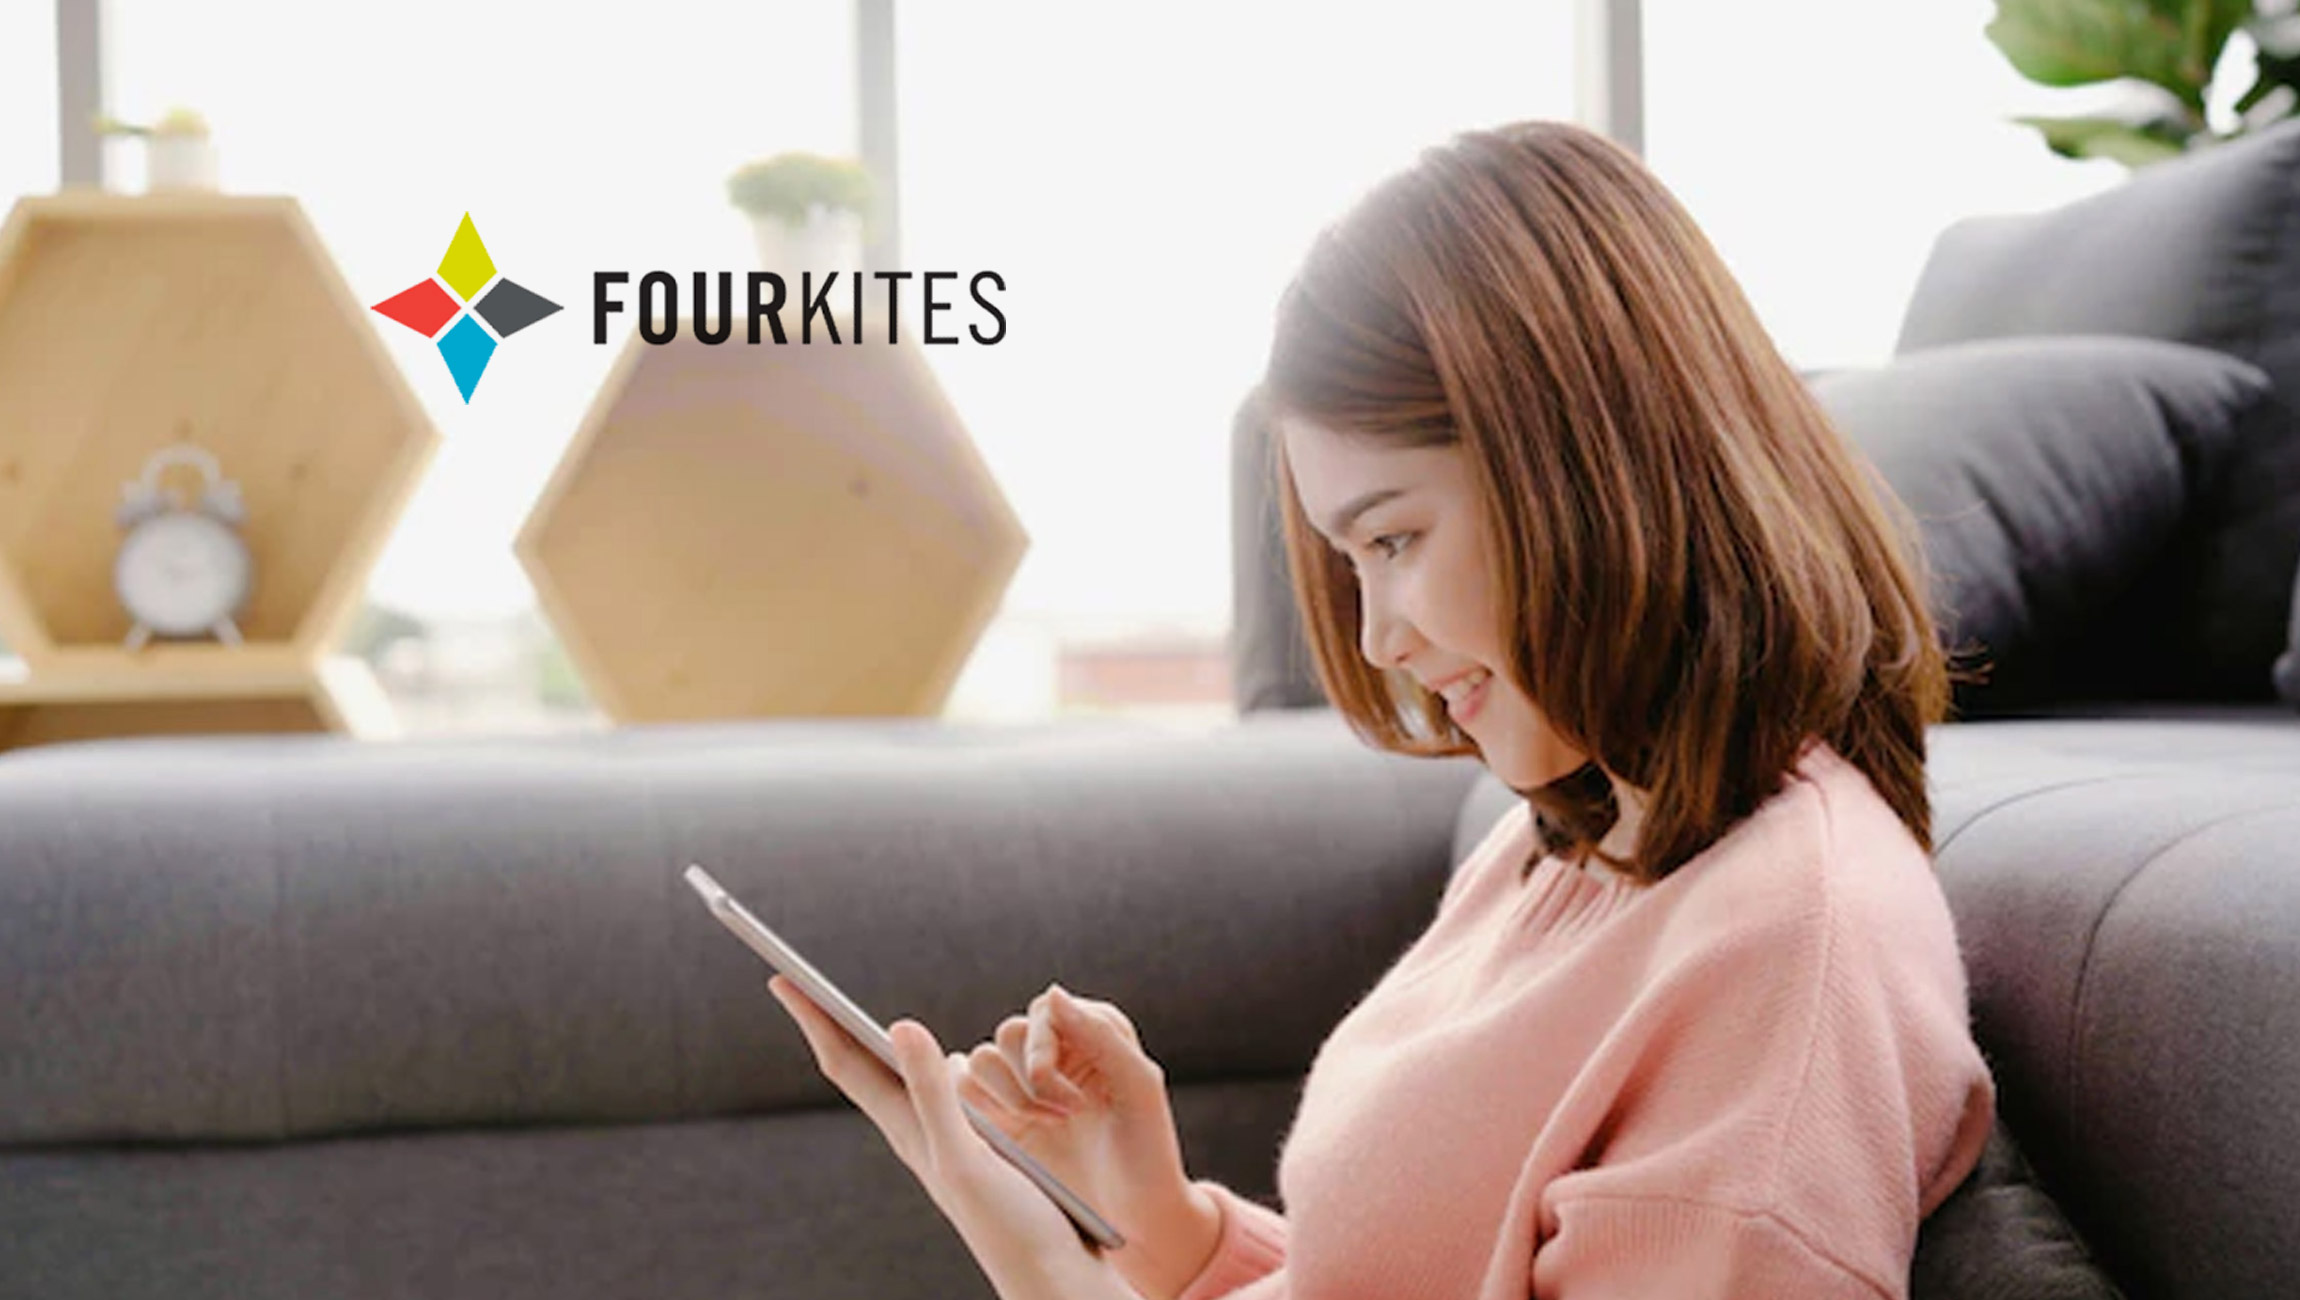 Supply Chain Visibility Leader FourKites Partners with Gravity Supply Chain Solutions to Provide Real-time, First-Mile Visibility for Global Shipments